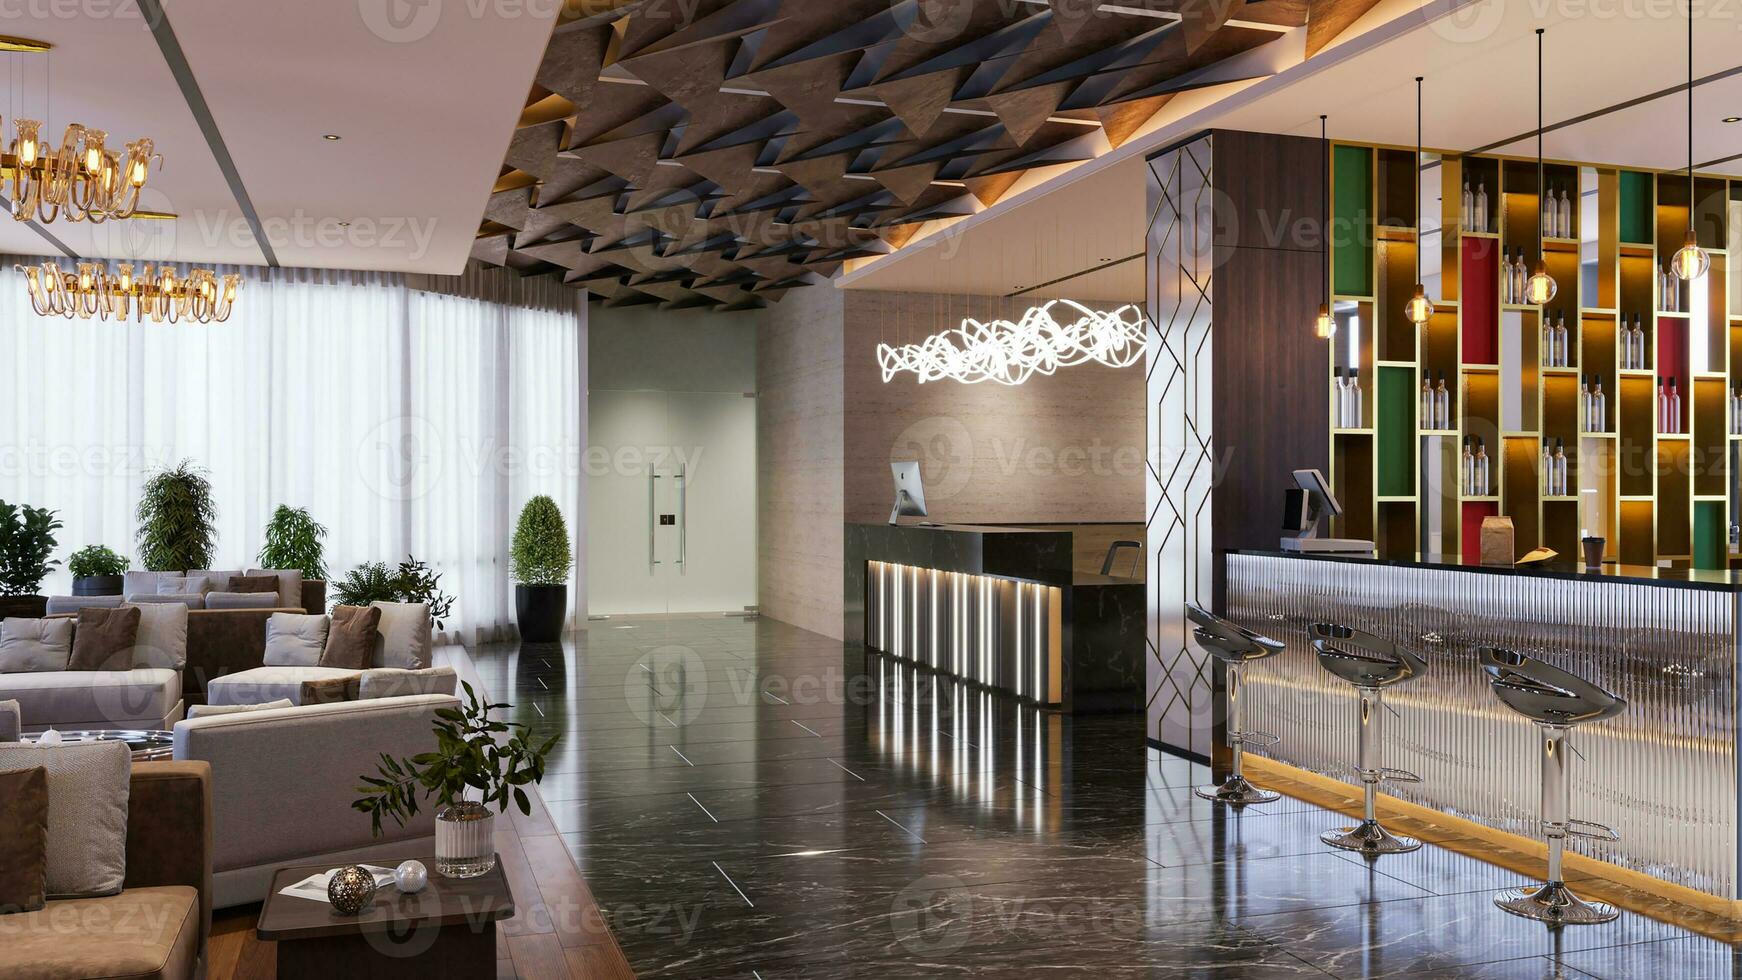 Hotel interior front desk design Minimalist Lobby Design for a Sleek Home  Architecture Look 3D rendering 30815979 Stock Photo at Vecteezy